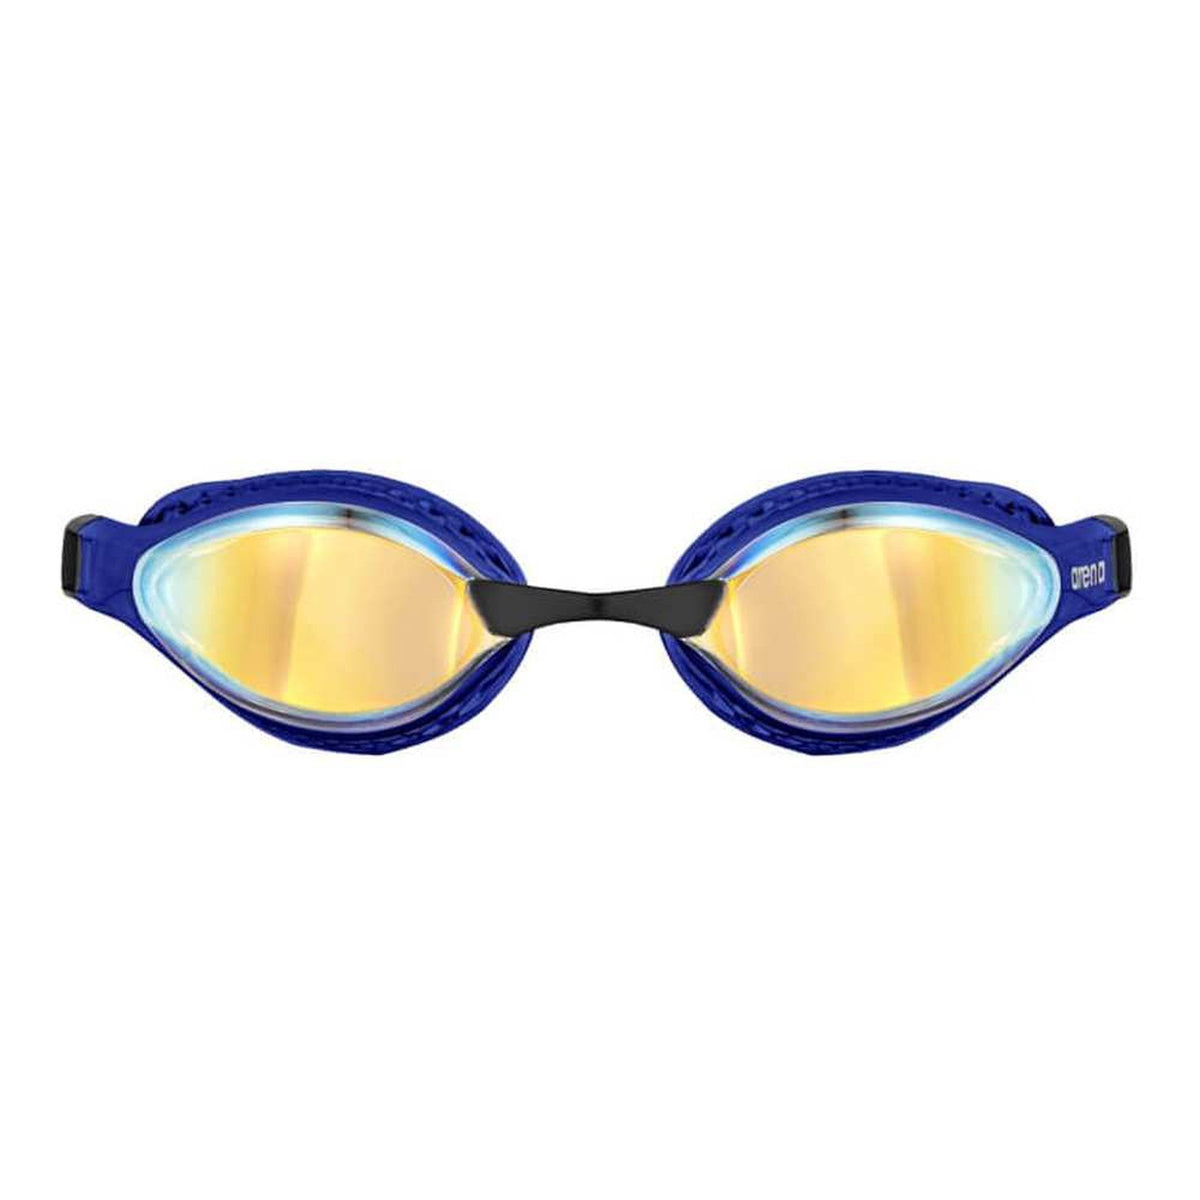 Arena Airspeed Mirror Goggle - Yellow Copper/Blue